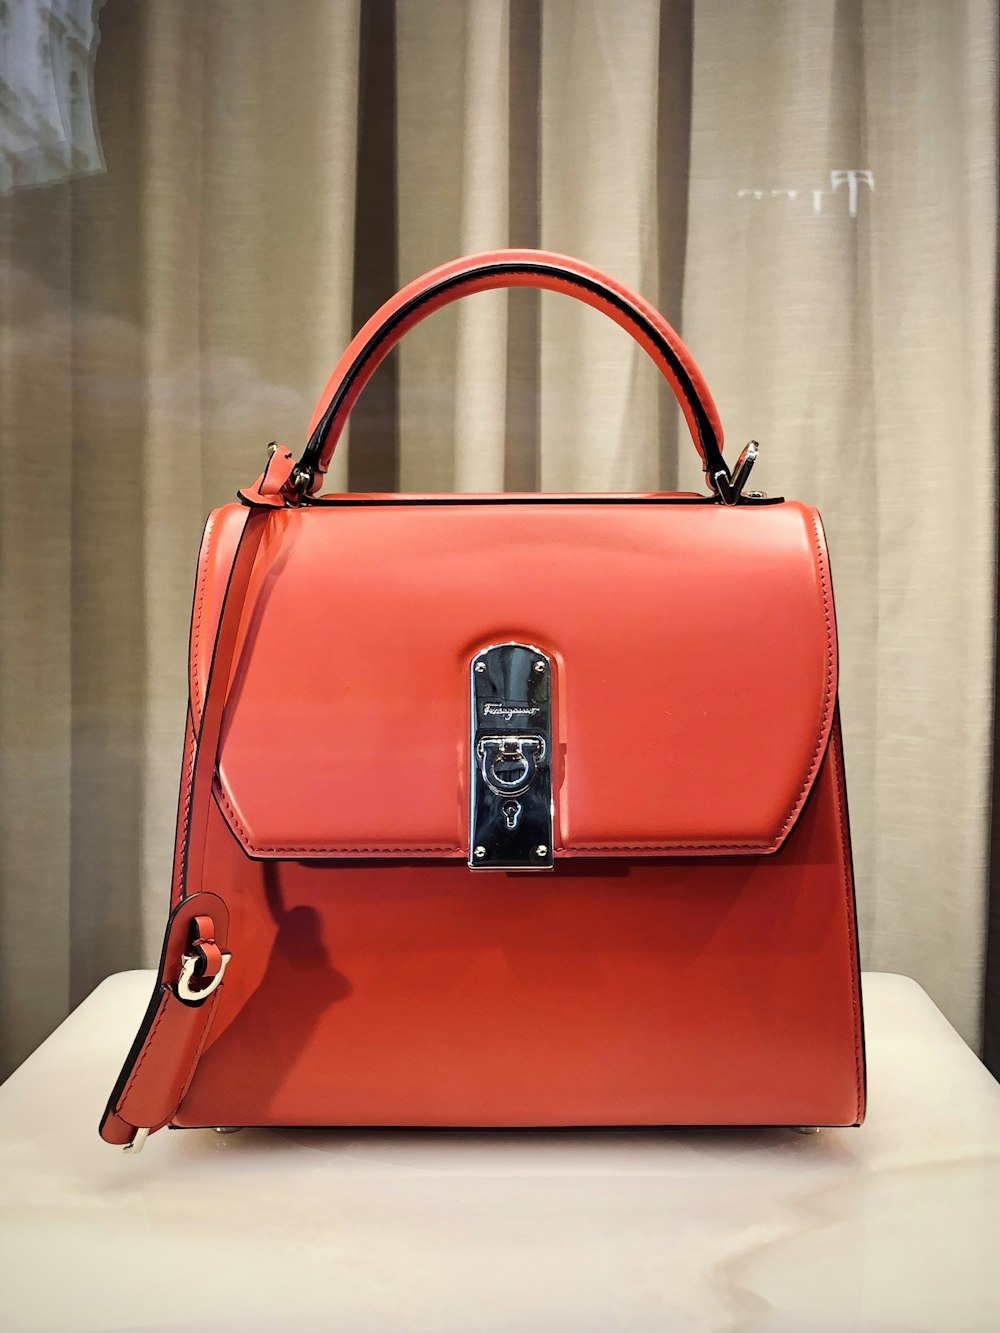 red leather handbag on white table